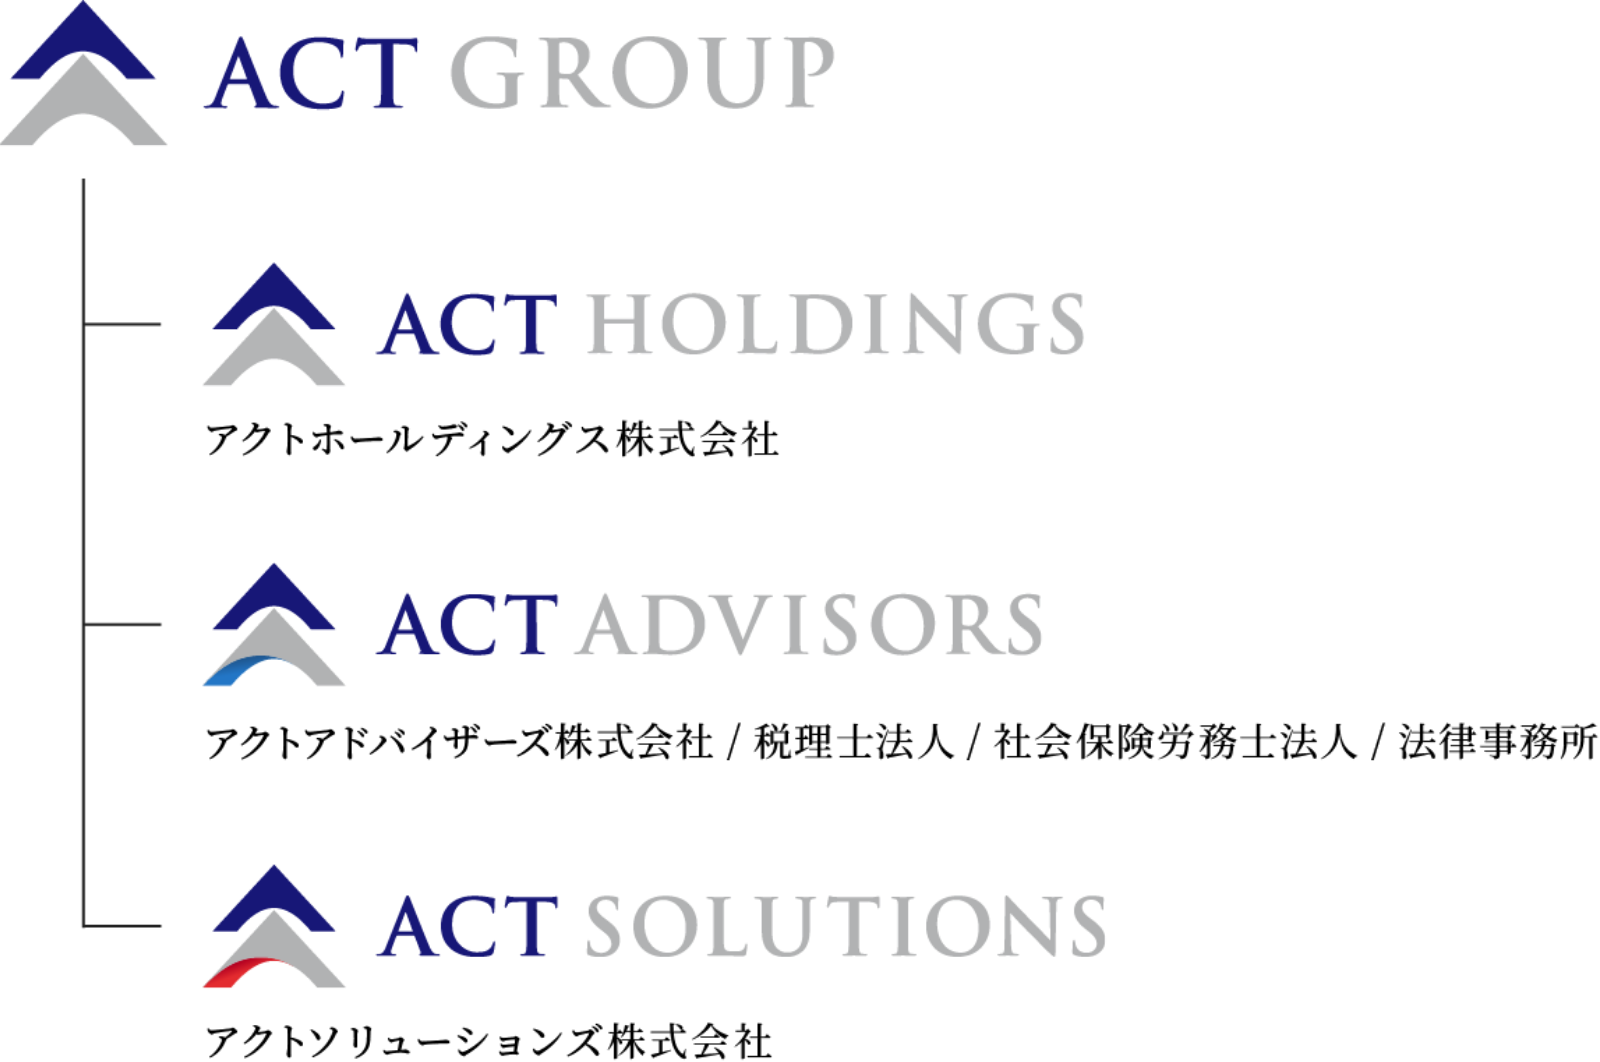 ACT GROUP